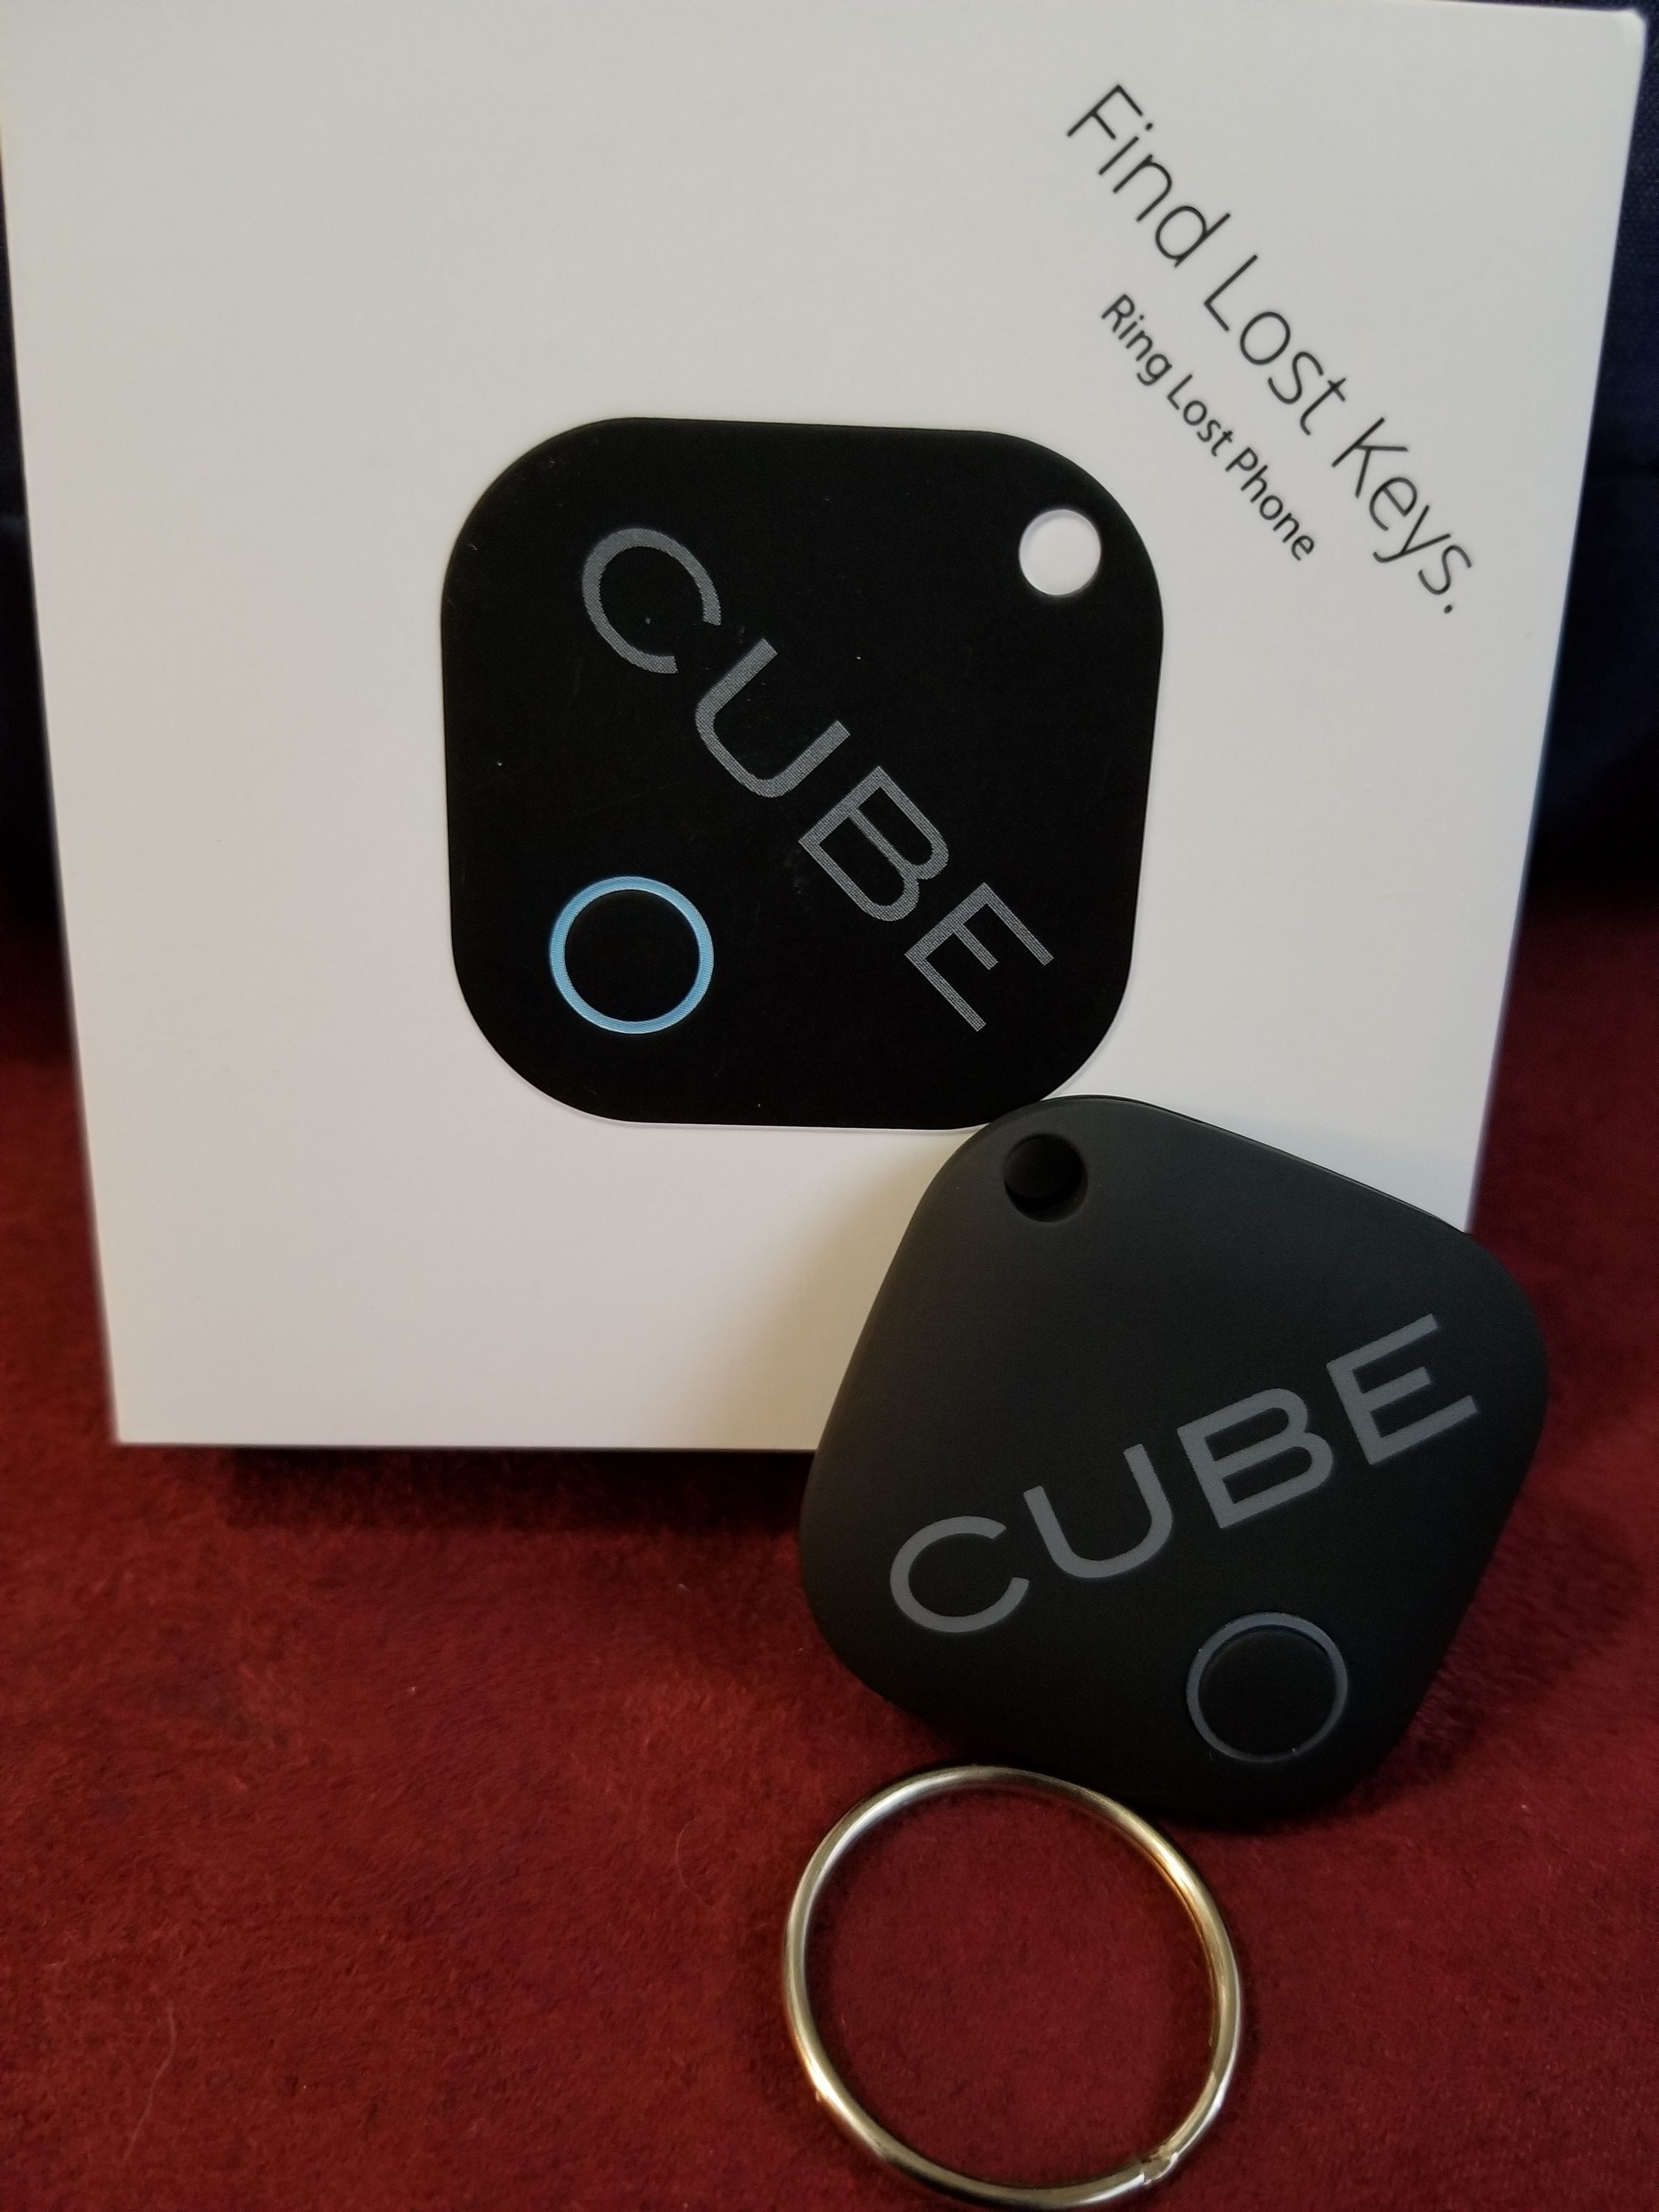 cube tracker review